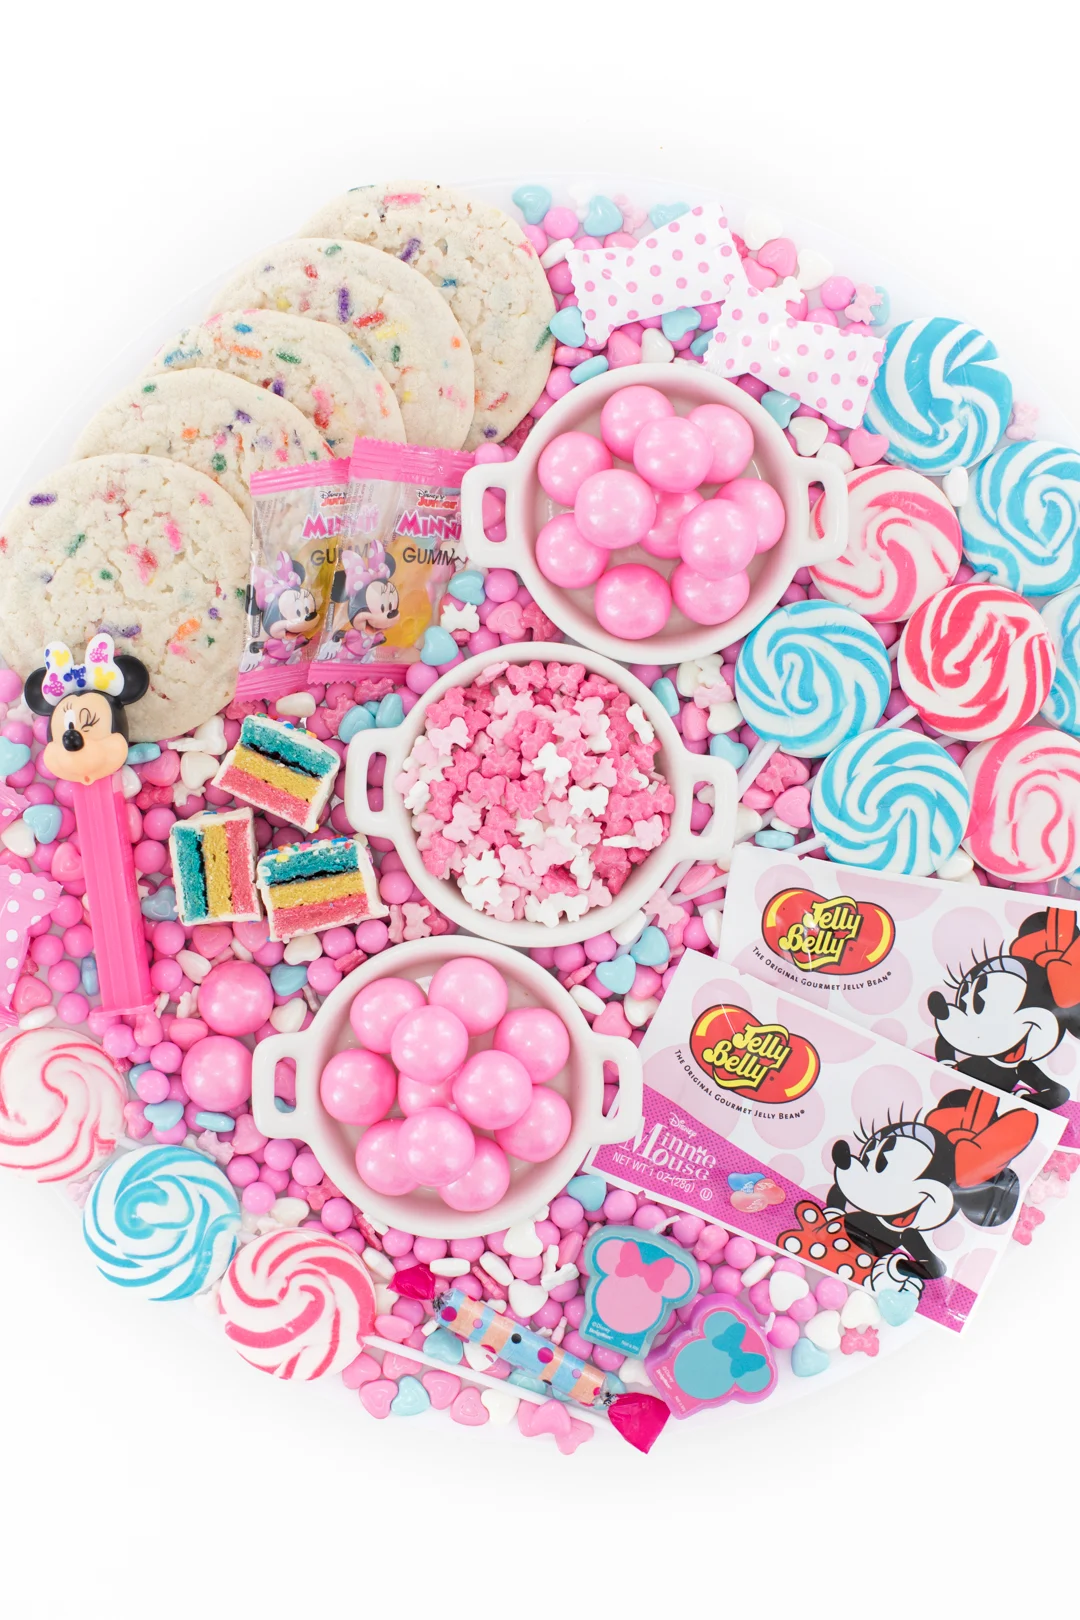 Minnie Mouse party candy ideas